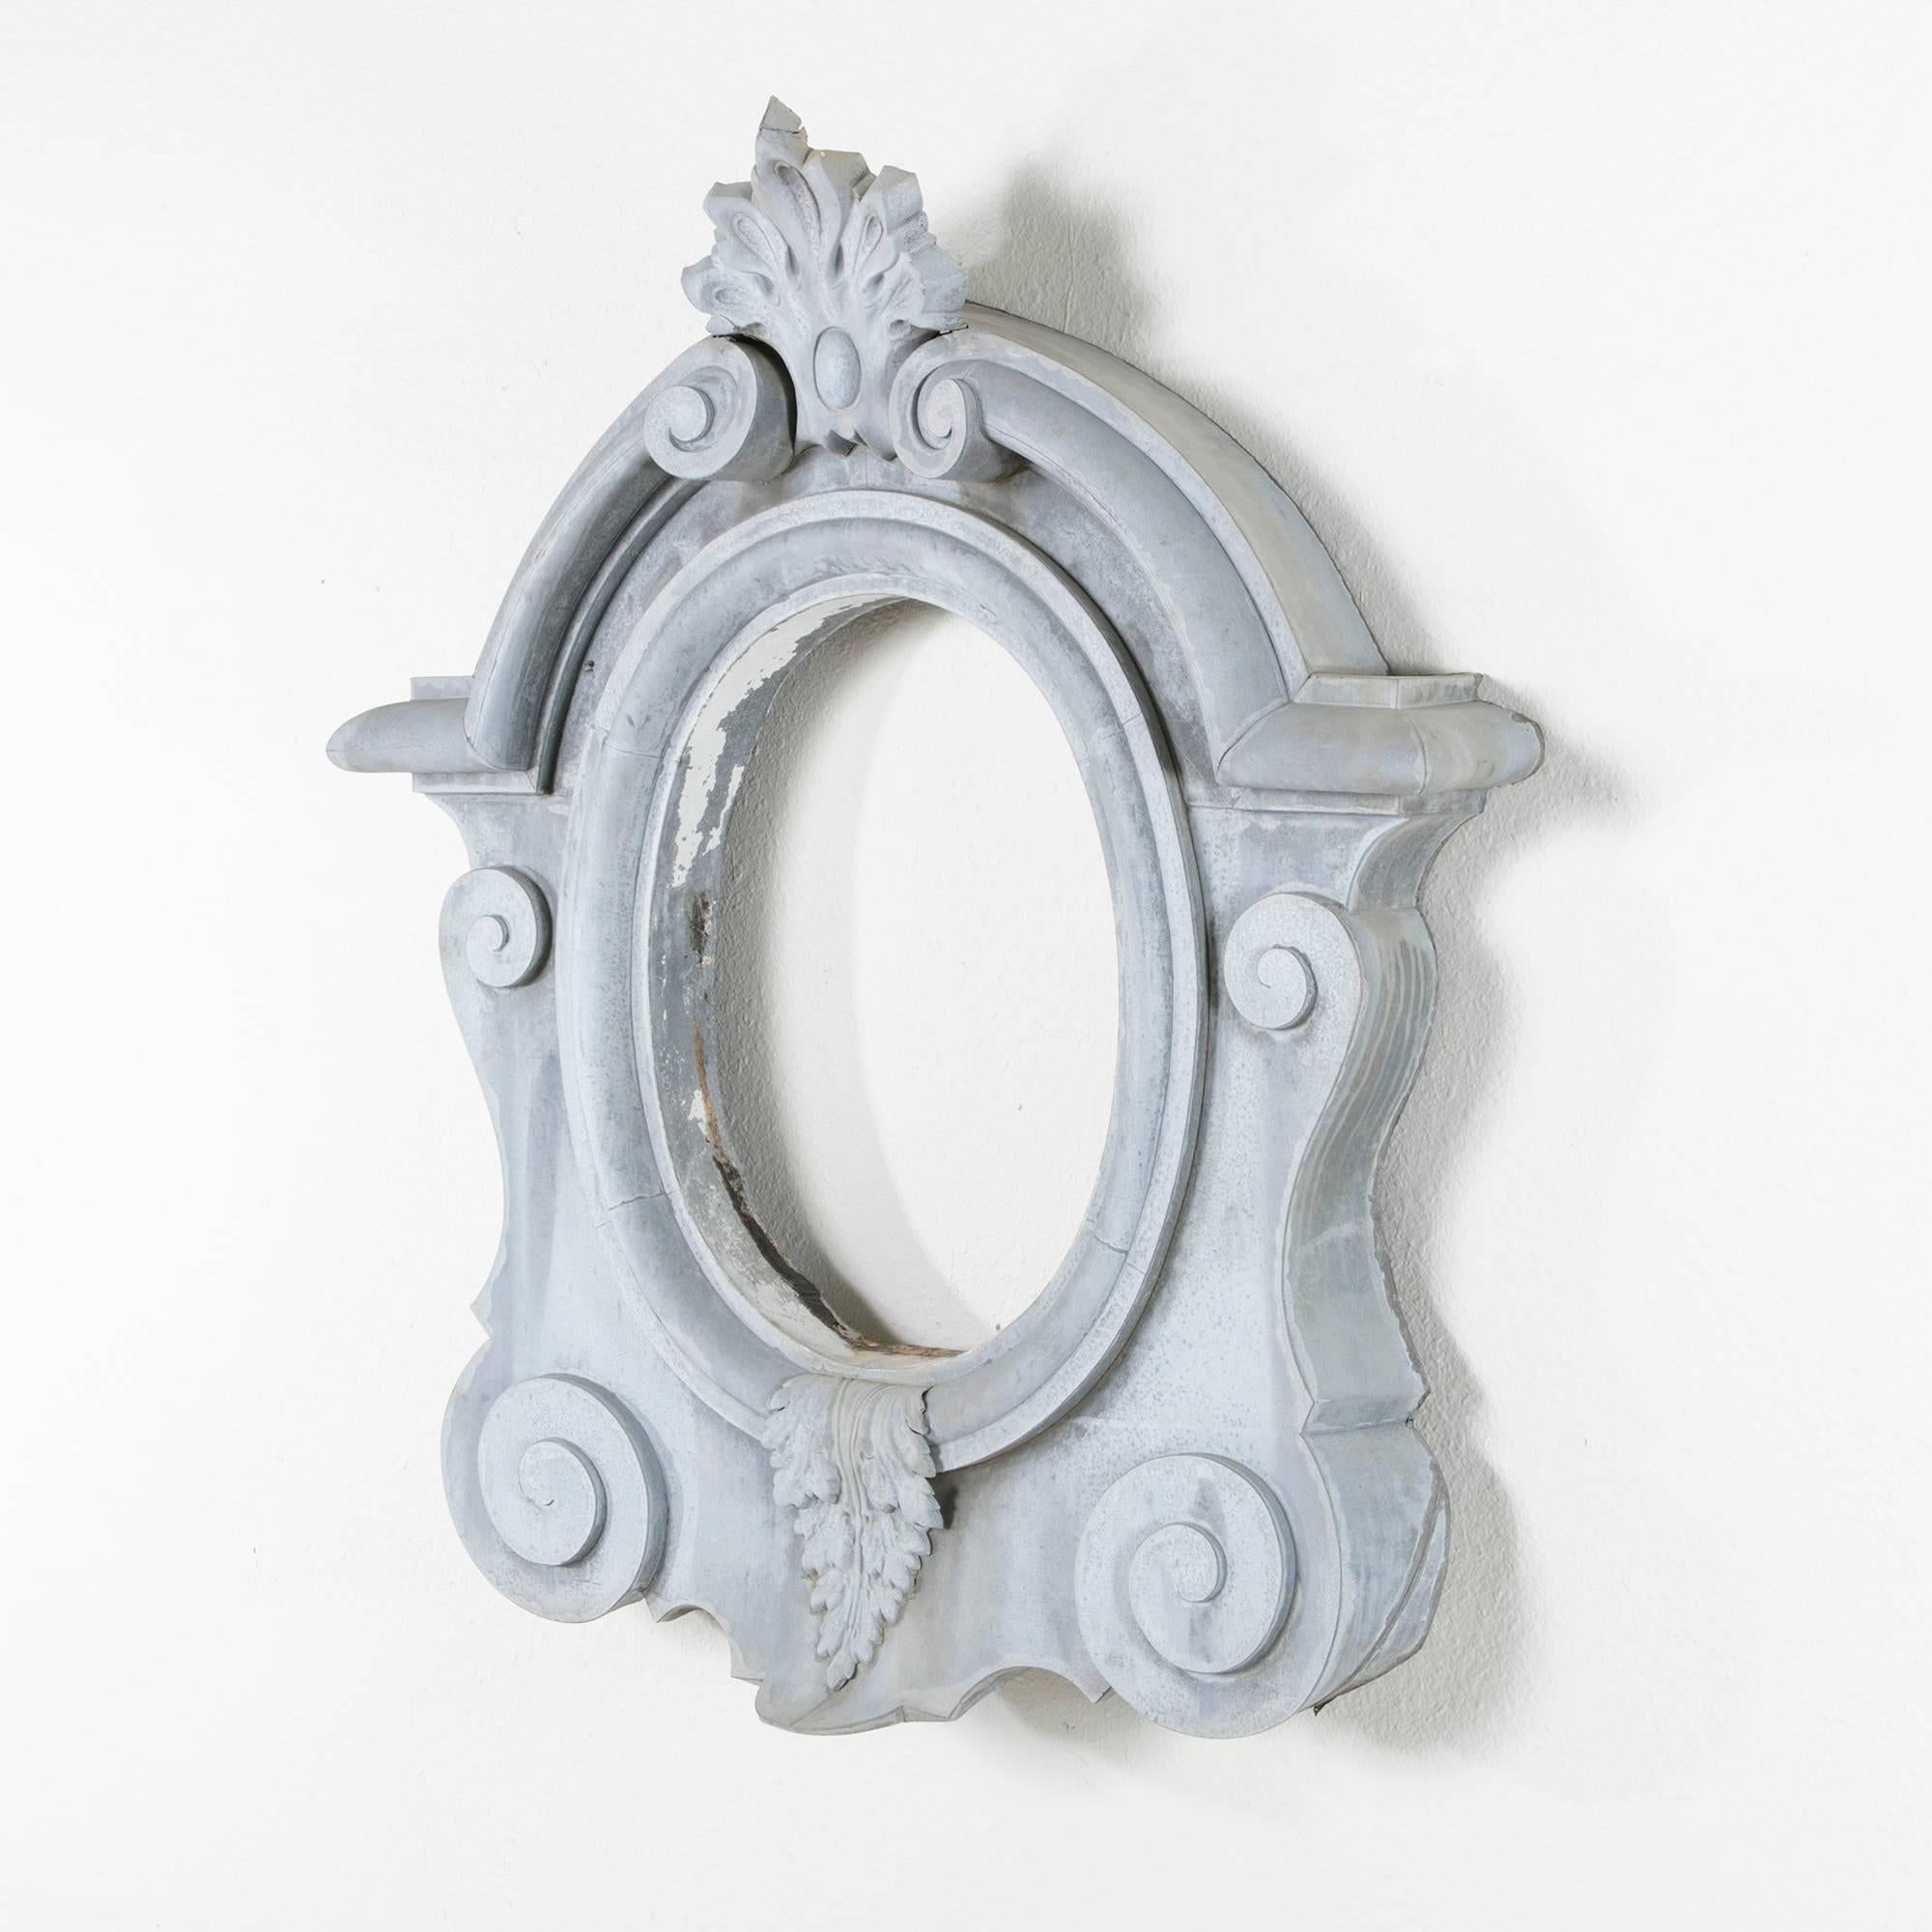 This large 19th century zinc bull's eye window, called an Oeil de Boeuf in French, was originally a dormer window in a Normandy manor house. At four feet in height, it makes an impressive statement as an architectural element hung on the wall and